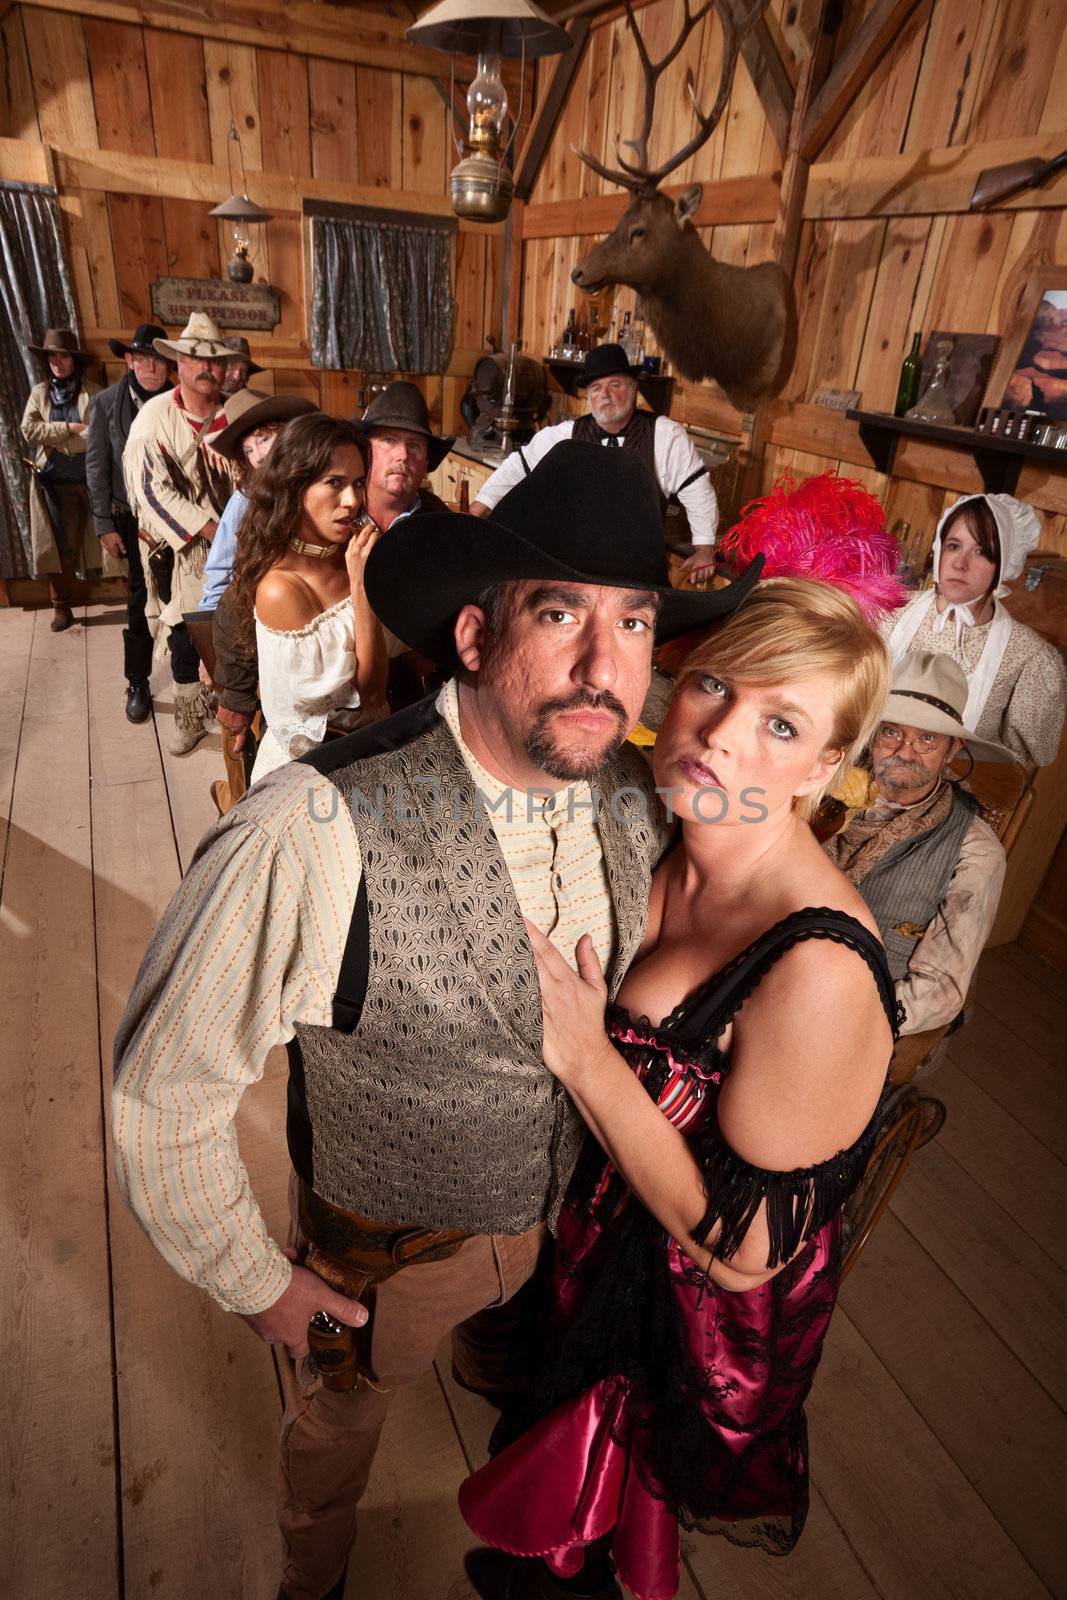 Serious old western couple in crowded saloon